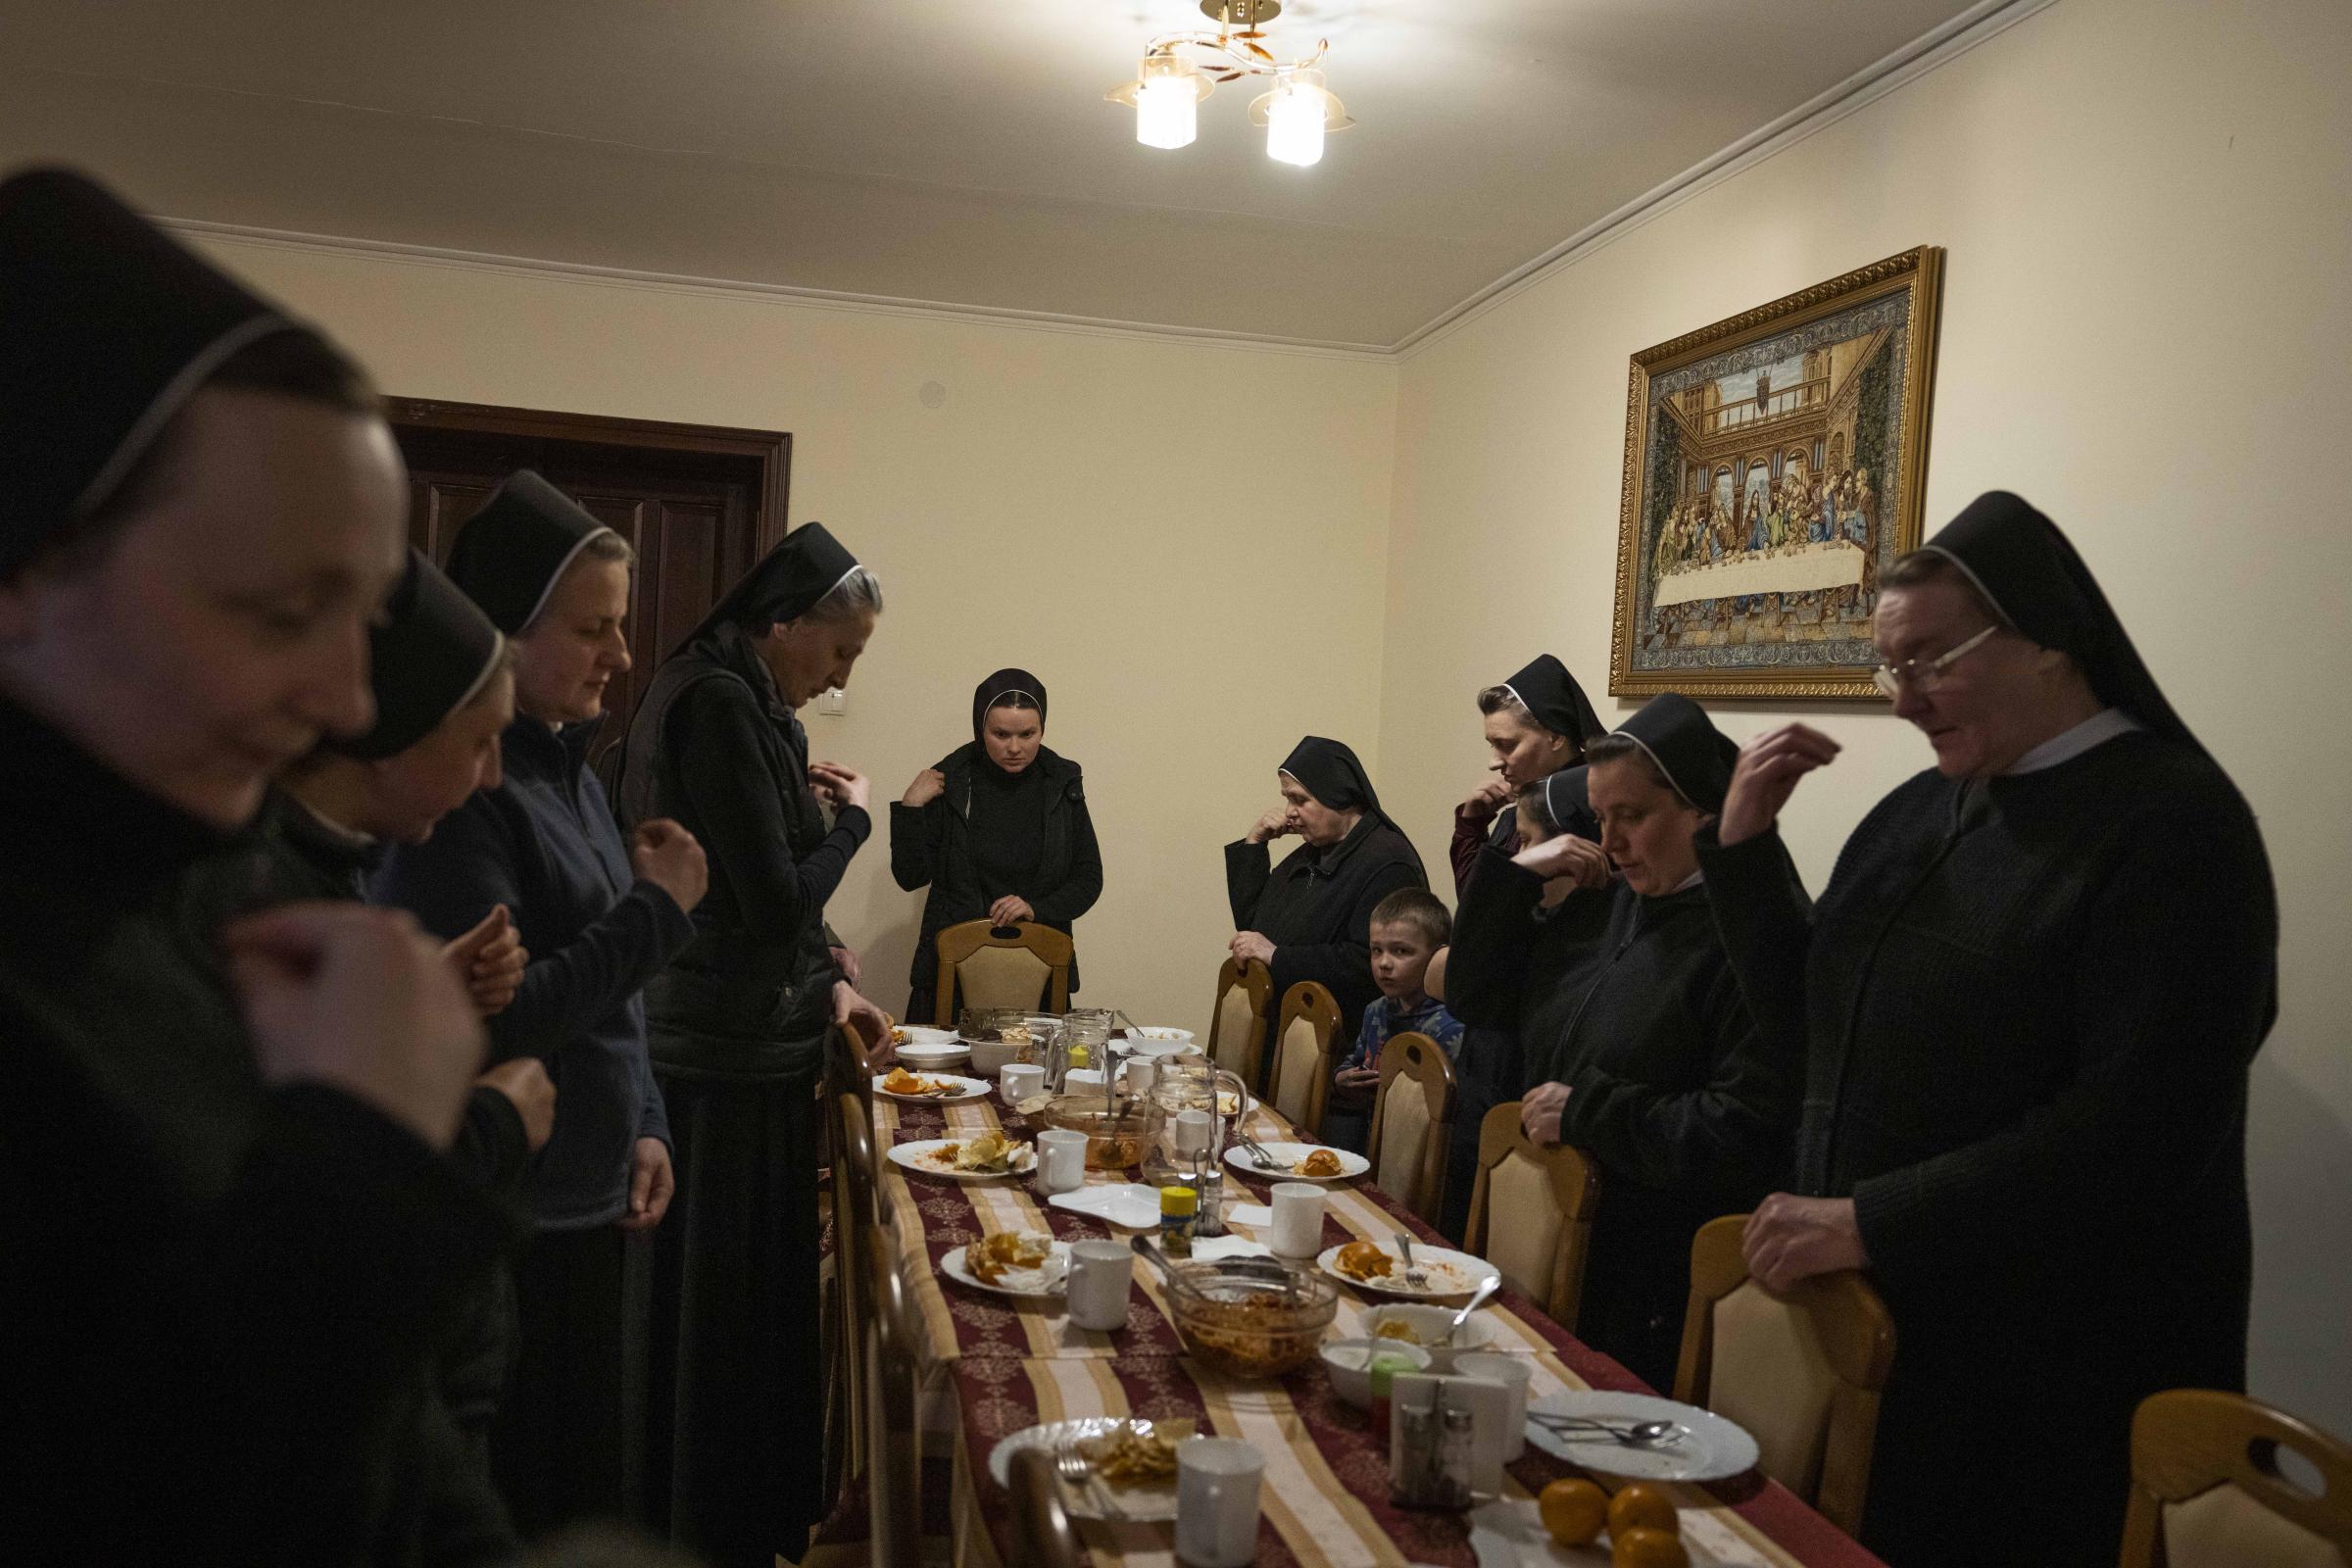 Ukraine's nuns open monastery doors to the displaced - Nuns make prayers after eating dinner.